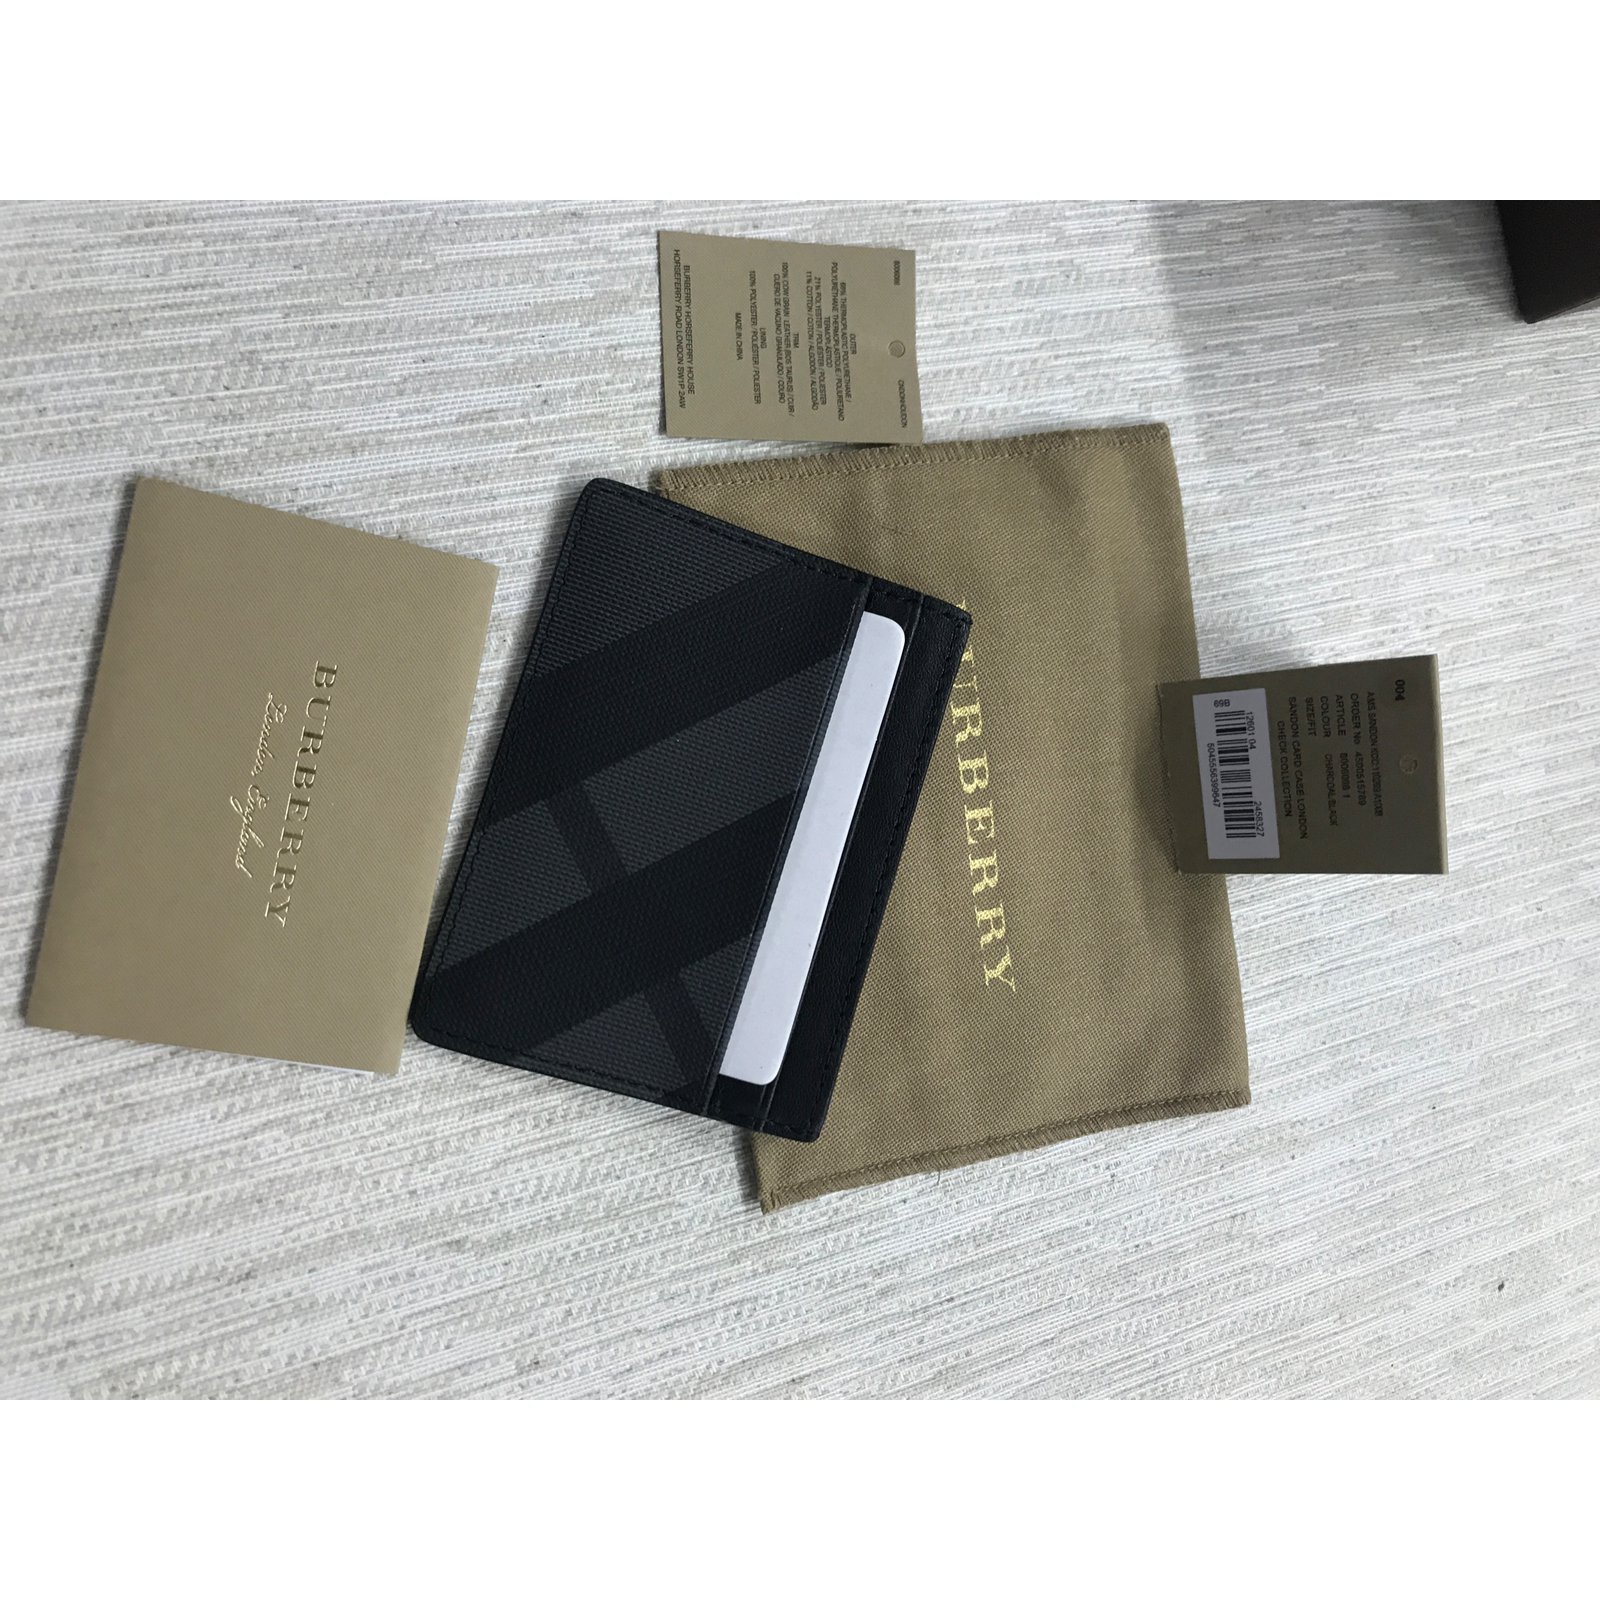 burberry london leather card case